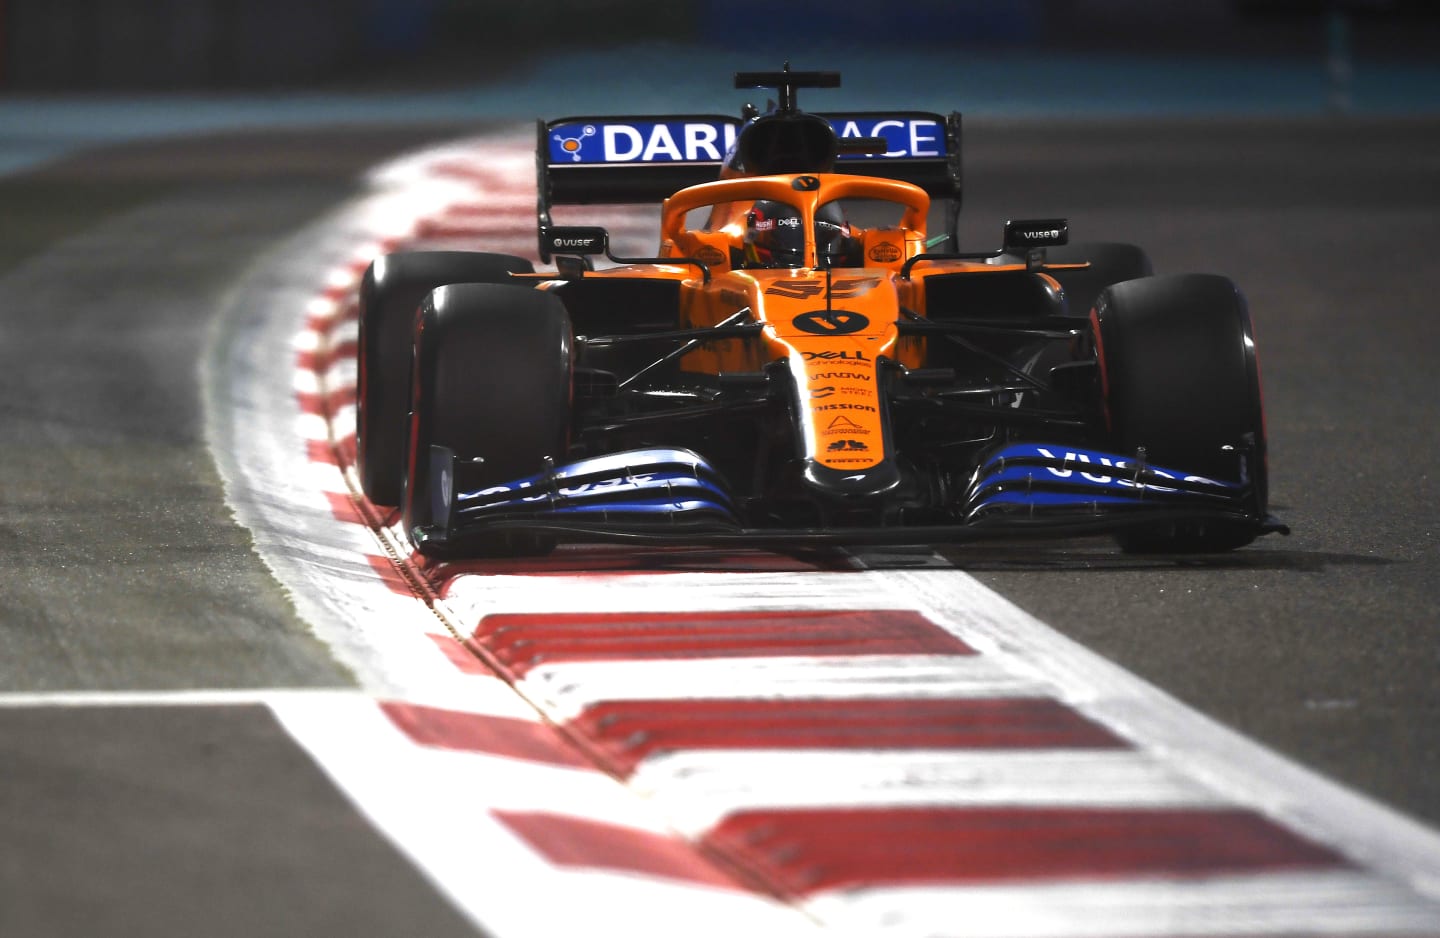 ABU DHABI, UNITED ARAB EMIRATES - DECEMBER 12: Carlos Sainz of Spain driving the (55) McLaren F1 Team MCL35 Renault on track during qualifying ahead of the F1 Grand Prix of Abu Dhabi at Yas Marina Circuit on December 12, 2020 in Abu Dhabi, United Arab Emirates. (Photo by Rudy Carezzevoli/Getty Images)